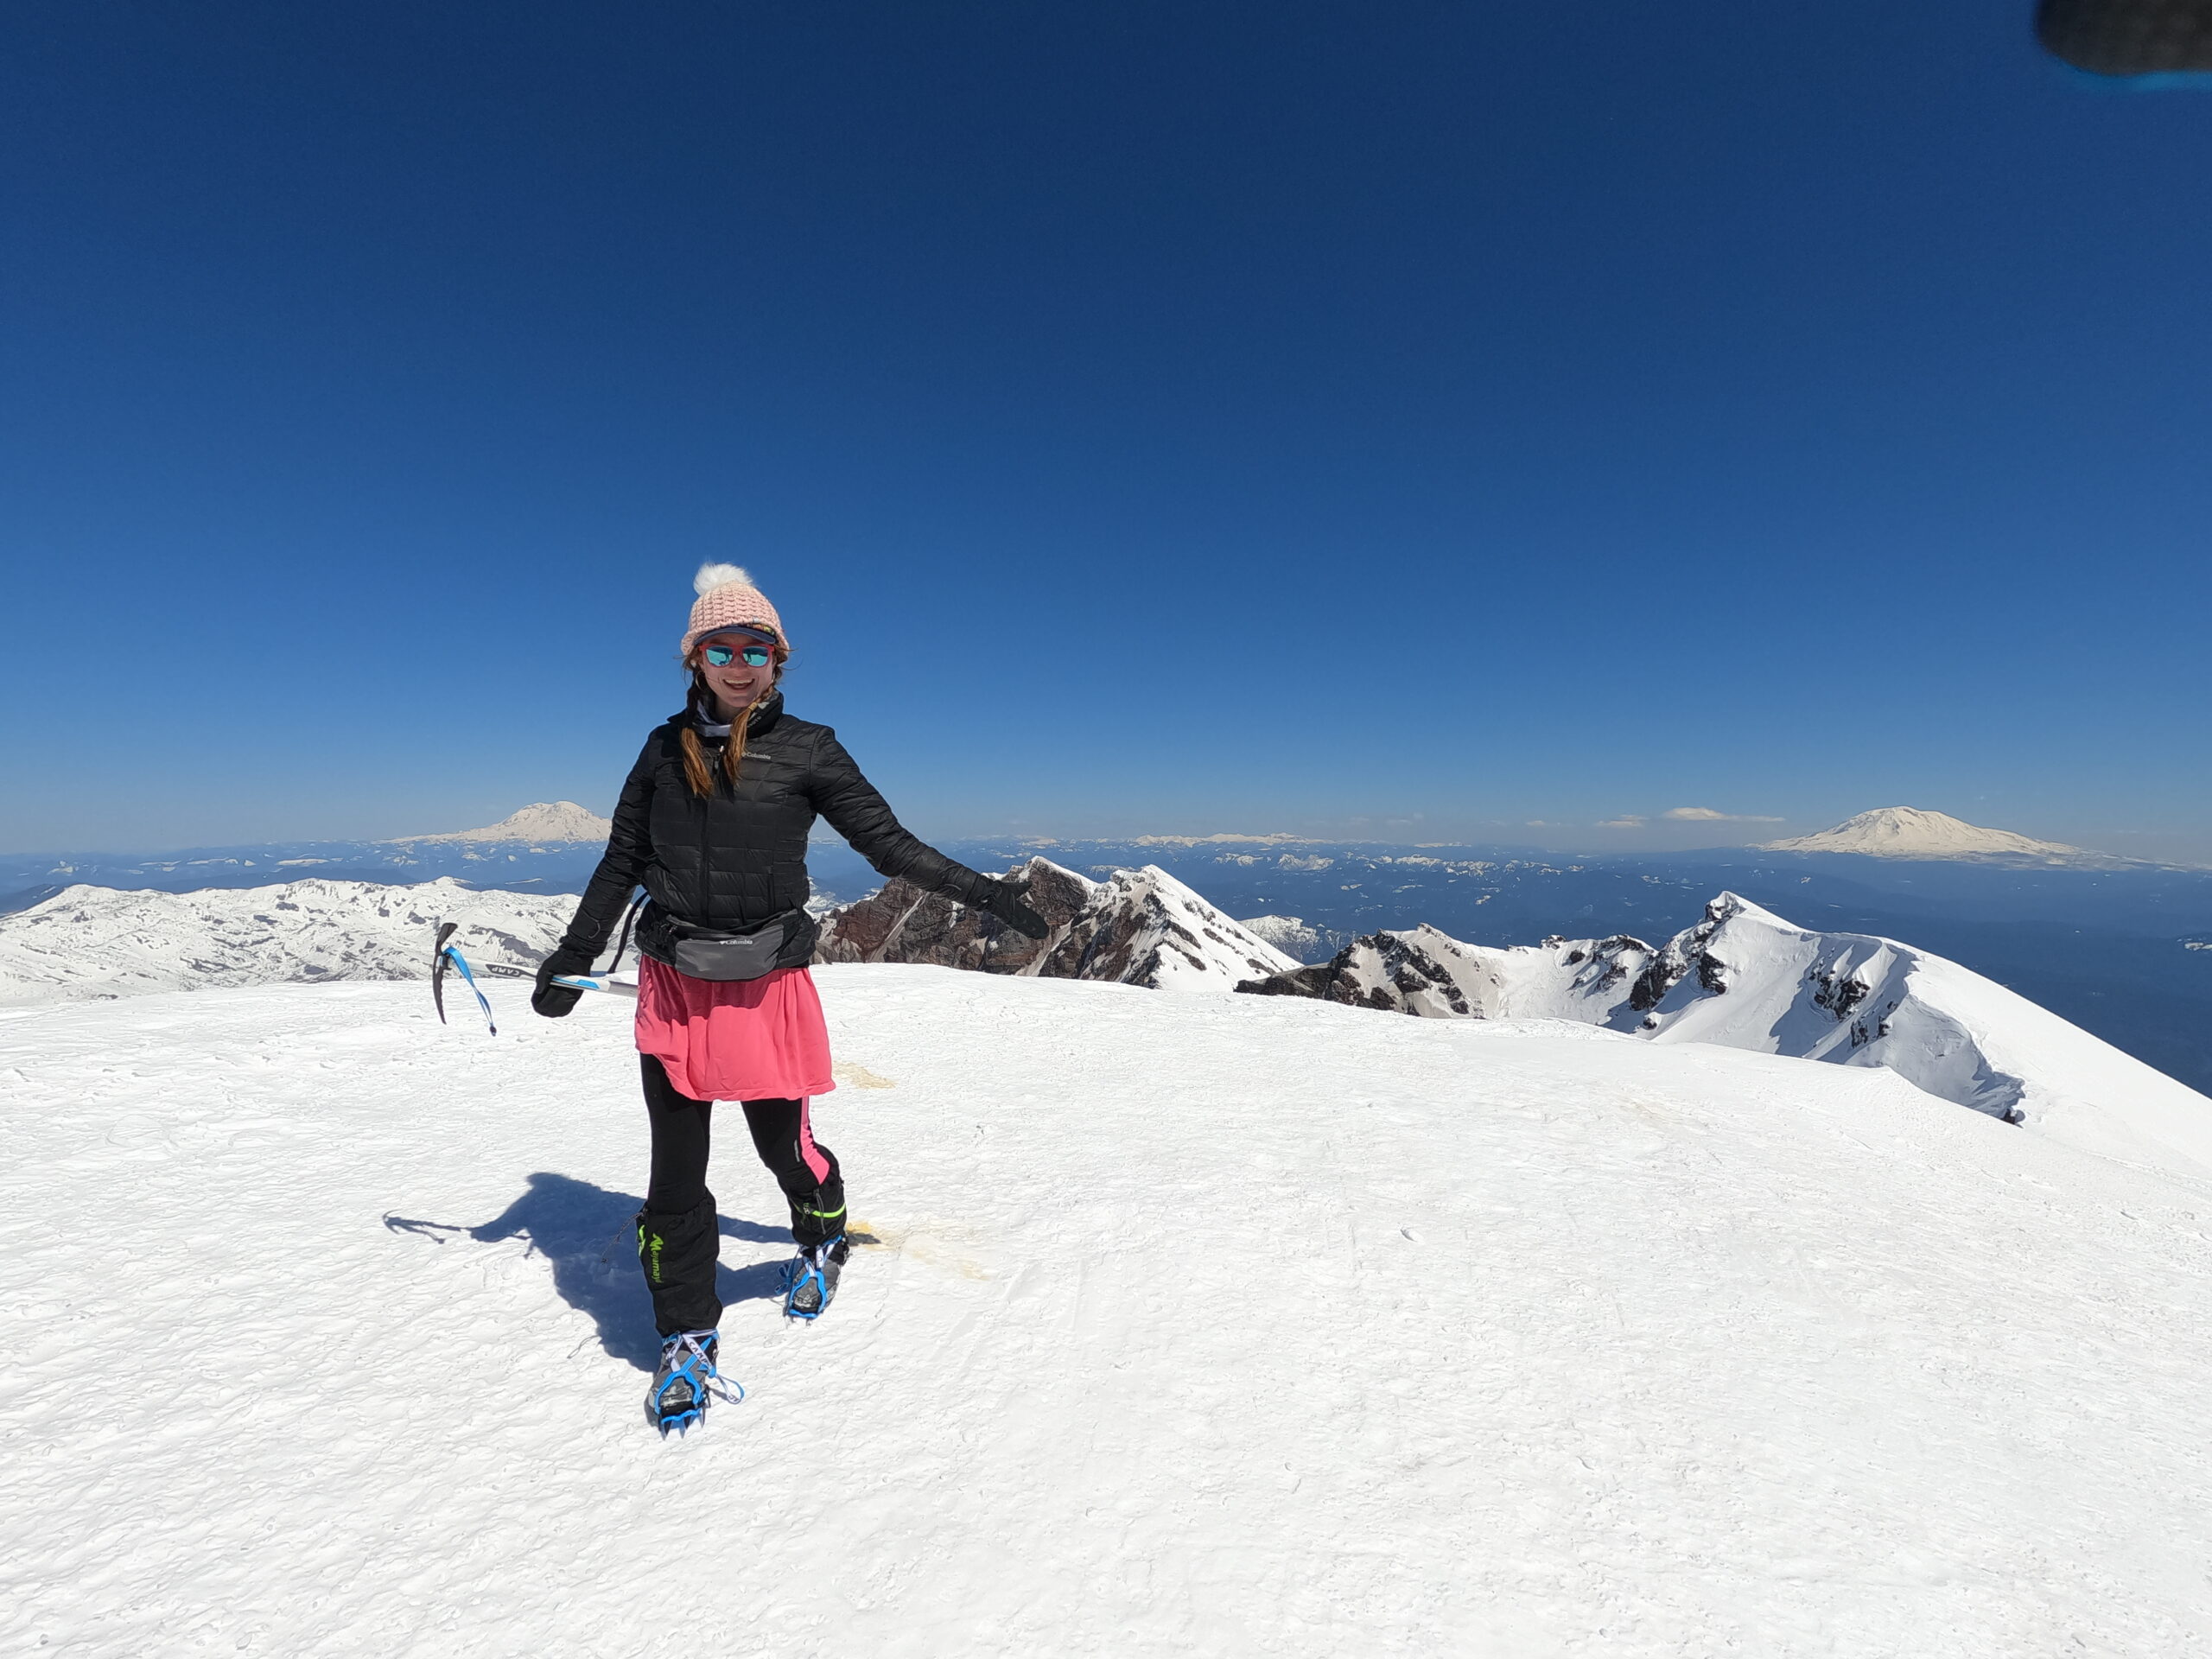 A Cairn project ambassador stands on a snowy mountain peak wearing crampons and a pink skirt and holding an ice axe